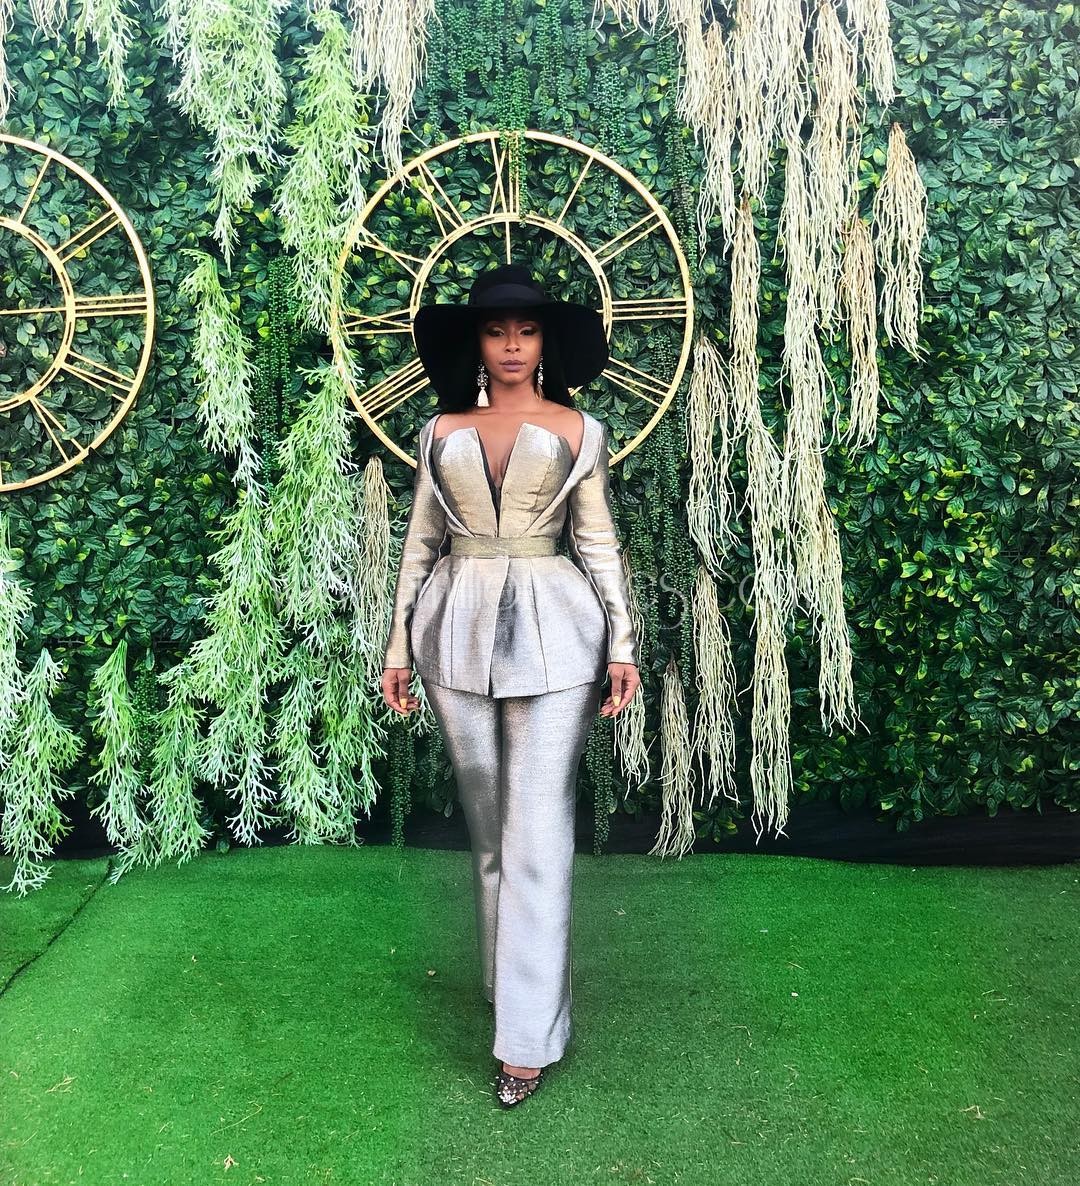 So Lit! Gorgeous Display Of Style At The 2018 Durban July Event In South Africa!